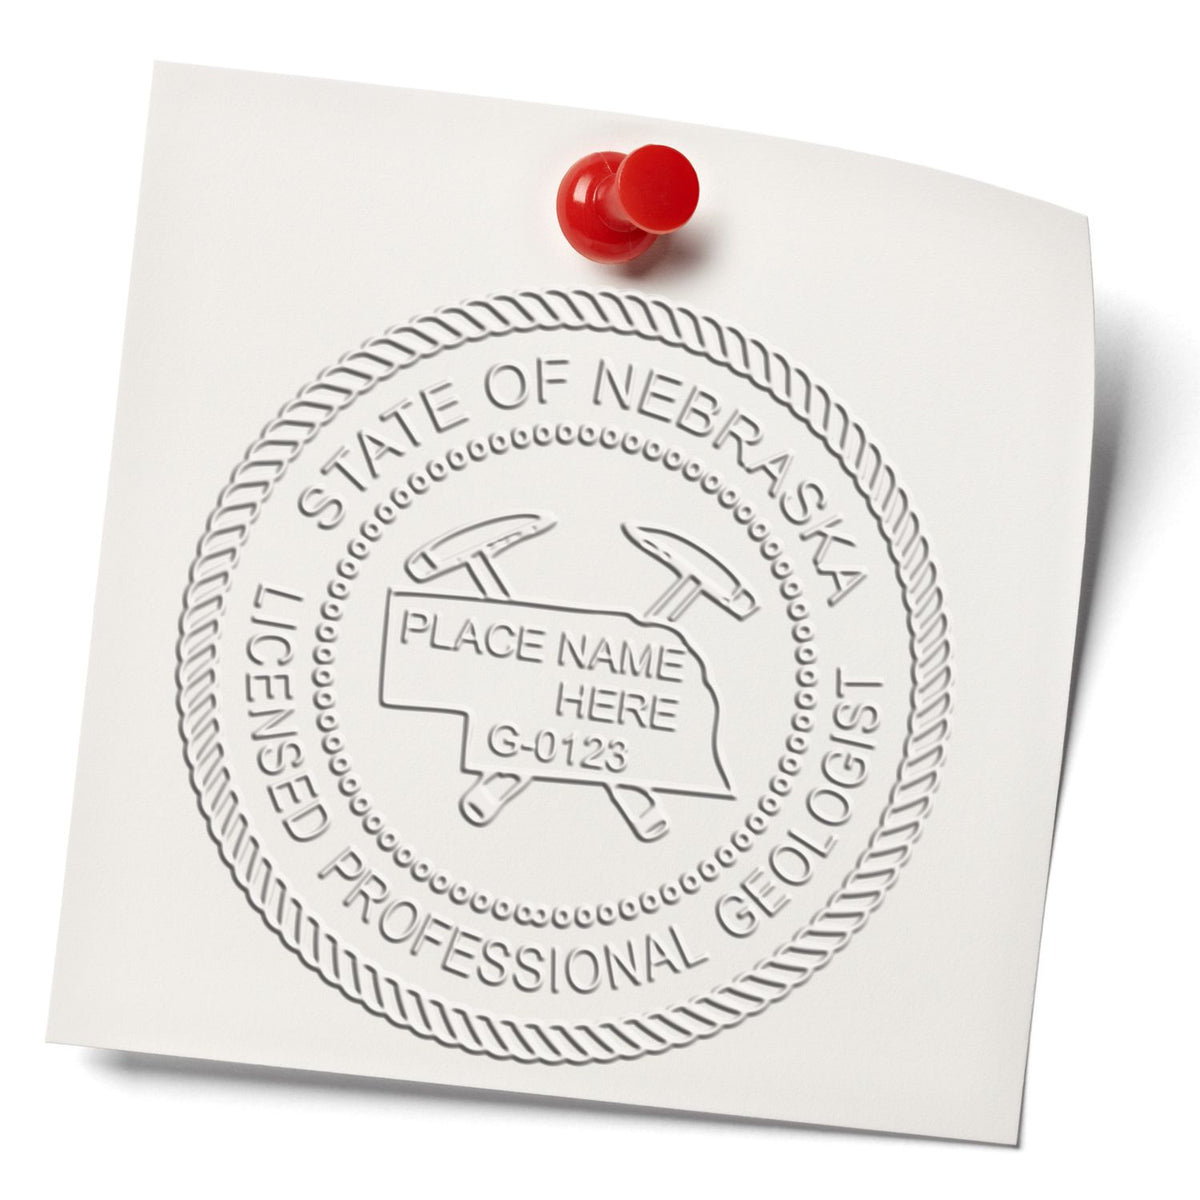 A stamped imprint of the Hybrid Nebraska Geologist Seal in this stylish lifestyle photo, setting the tone for a unique and personalized product.